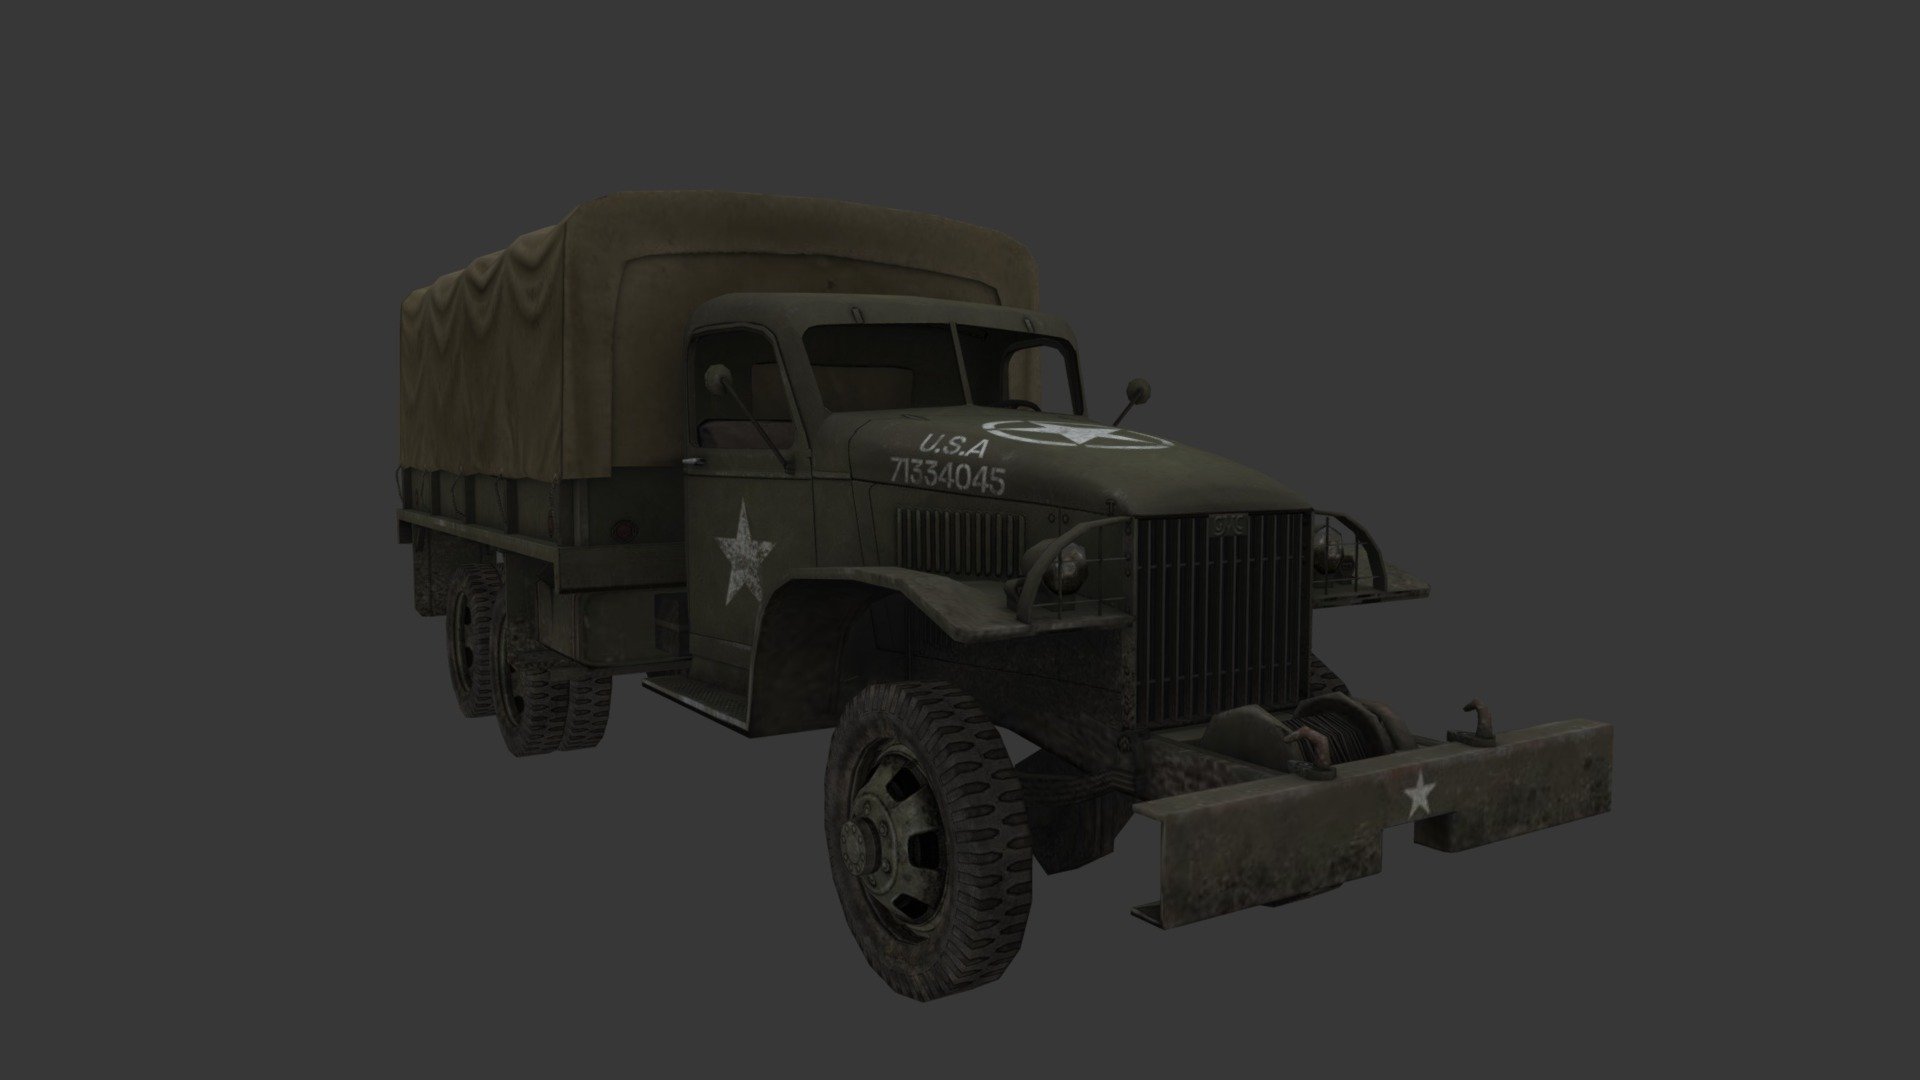 New GMC CCKW 353 model for the Red Orchestra 1 mod, named Darkest Hour.
This truck is used to transport supplies and players.

Model made with: Blender
Texture made with: Substance Painter - GMC CCKW 353 | Red Orchestra: Darkest Hour - 3D model by MattyNL 3d model